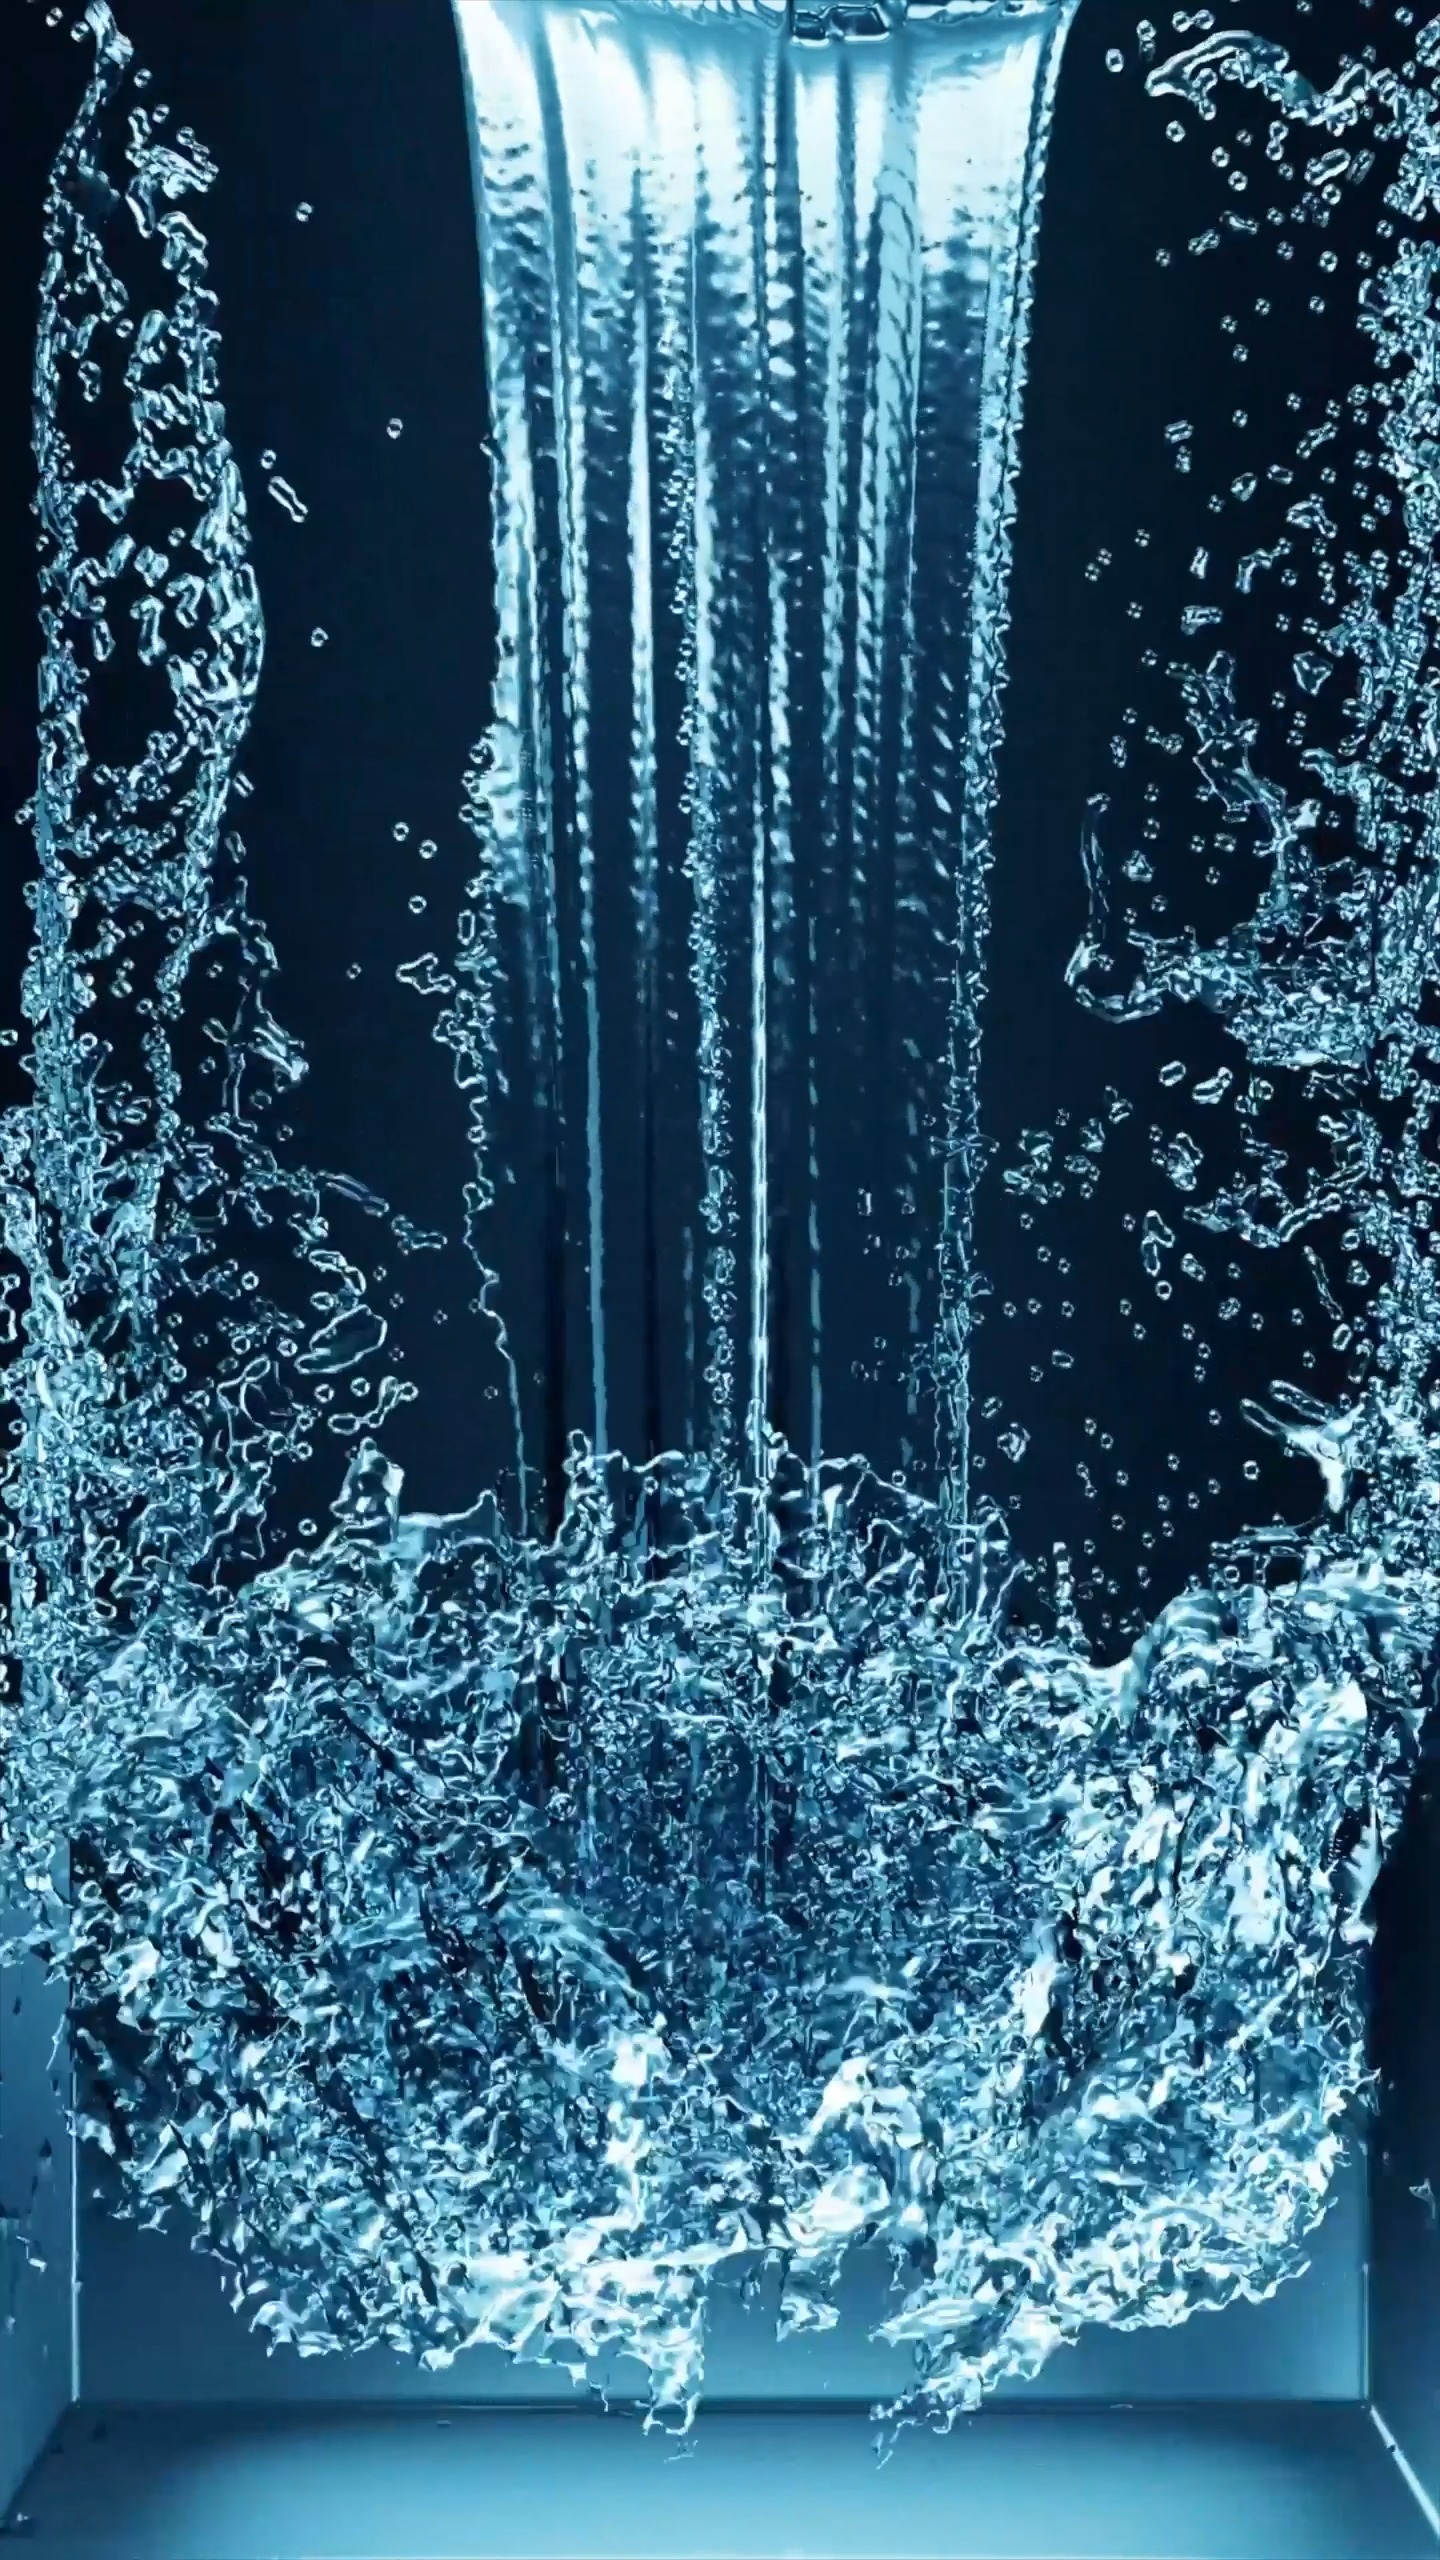 thumb for Water Live Wallpaper